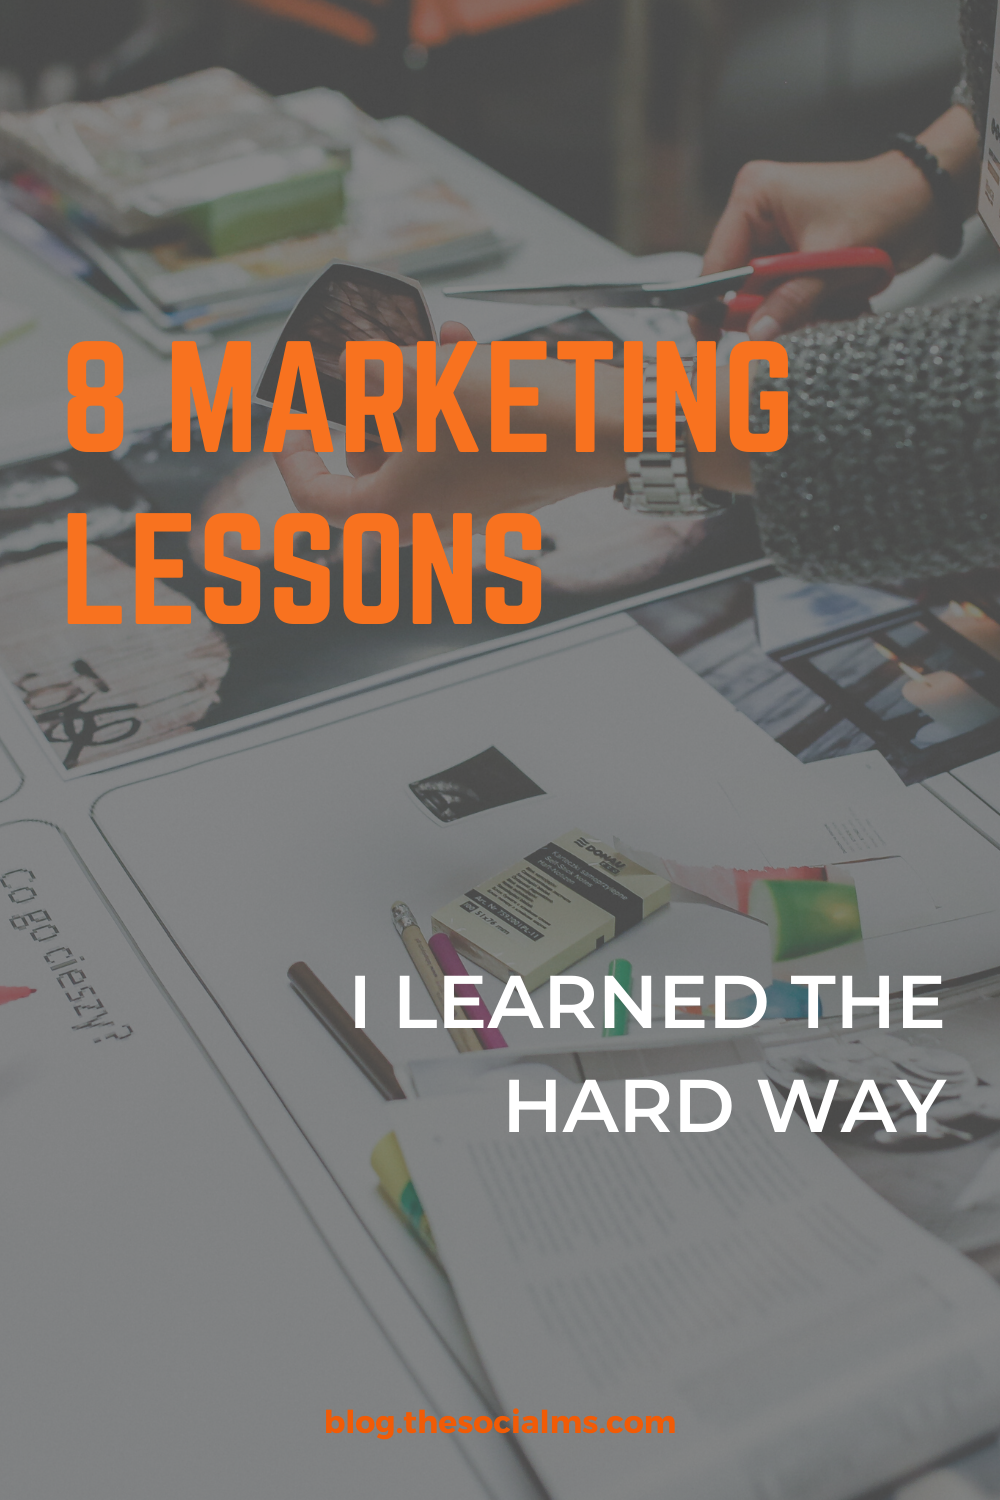 During the process of building your own marketing strategy, you will have to learn some marketing lessons. Here are the lessons that I learned. #marketing #onlinemarketing #marketingstrategy #digitalmarketing #smallbusinessmarketing